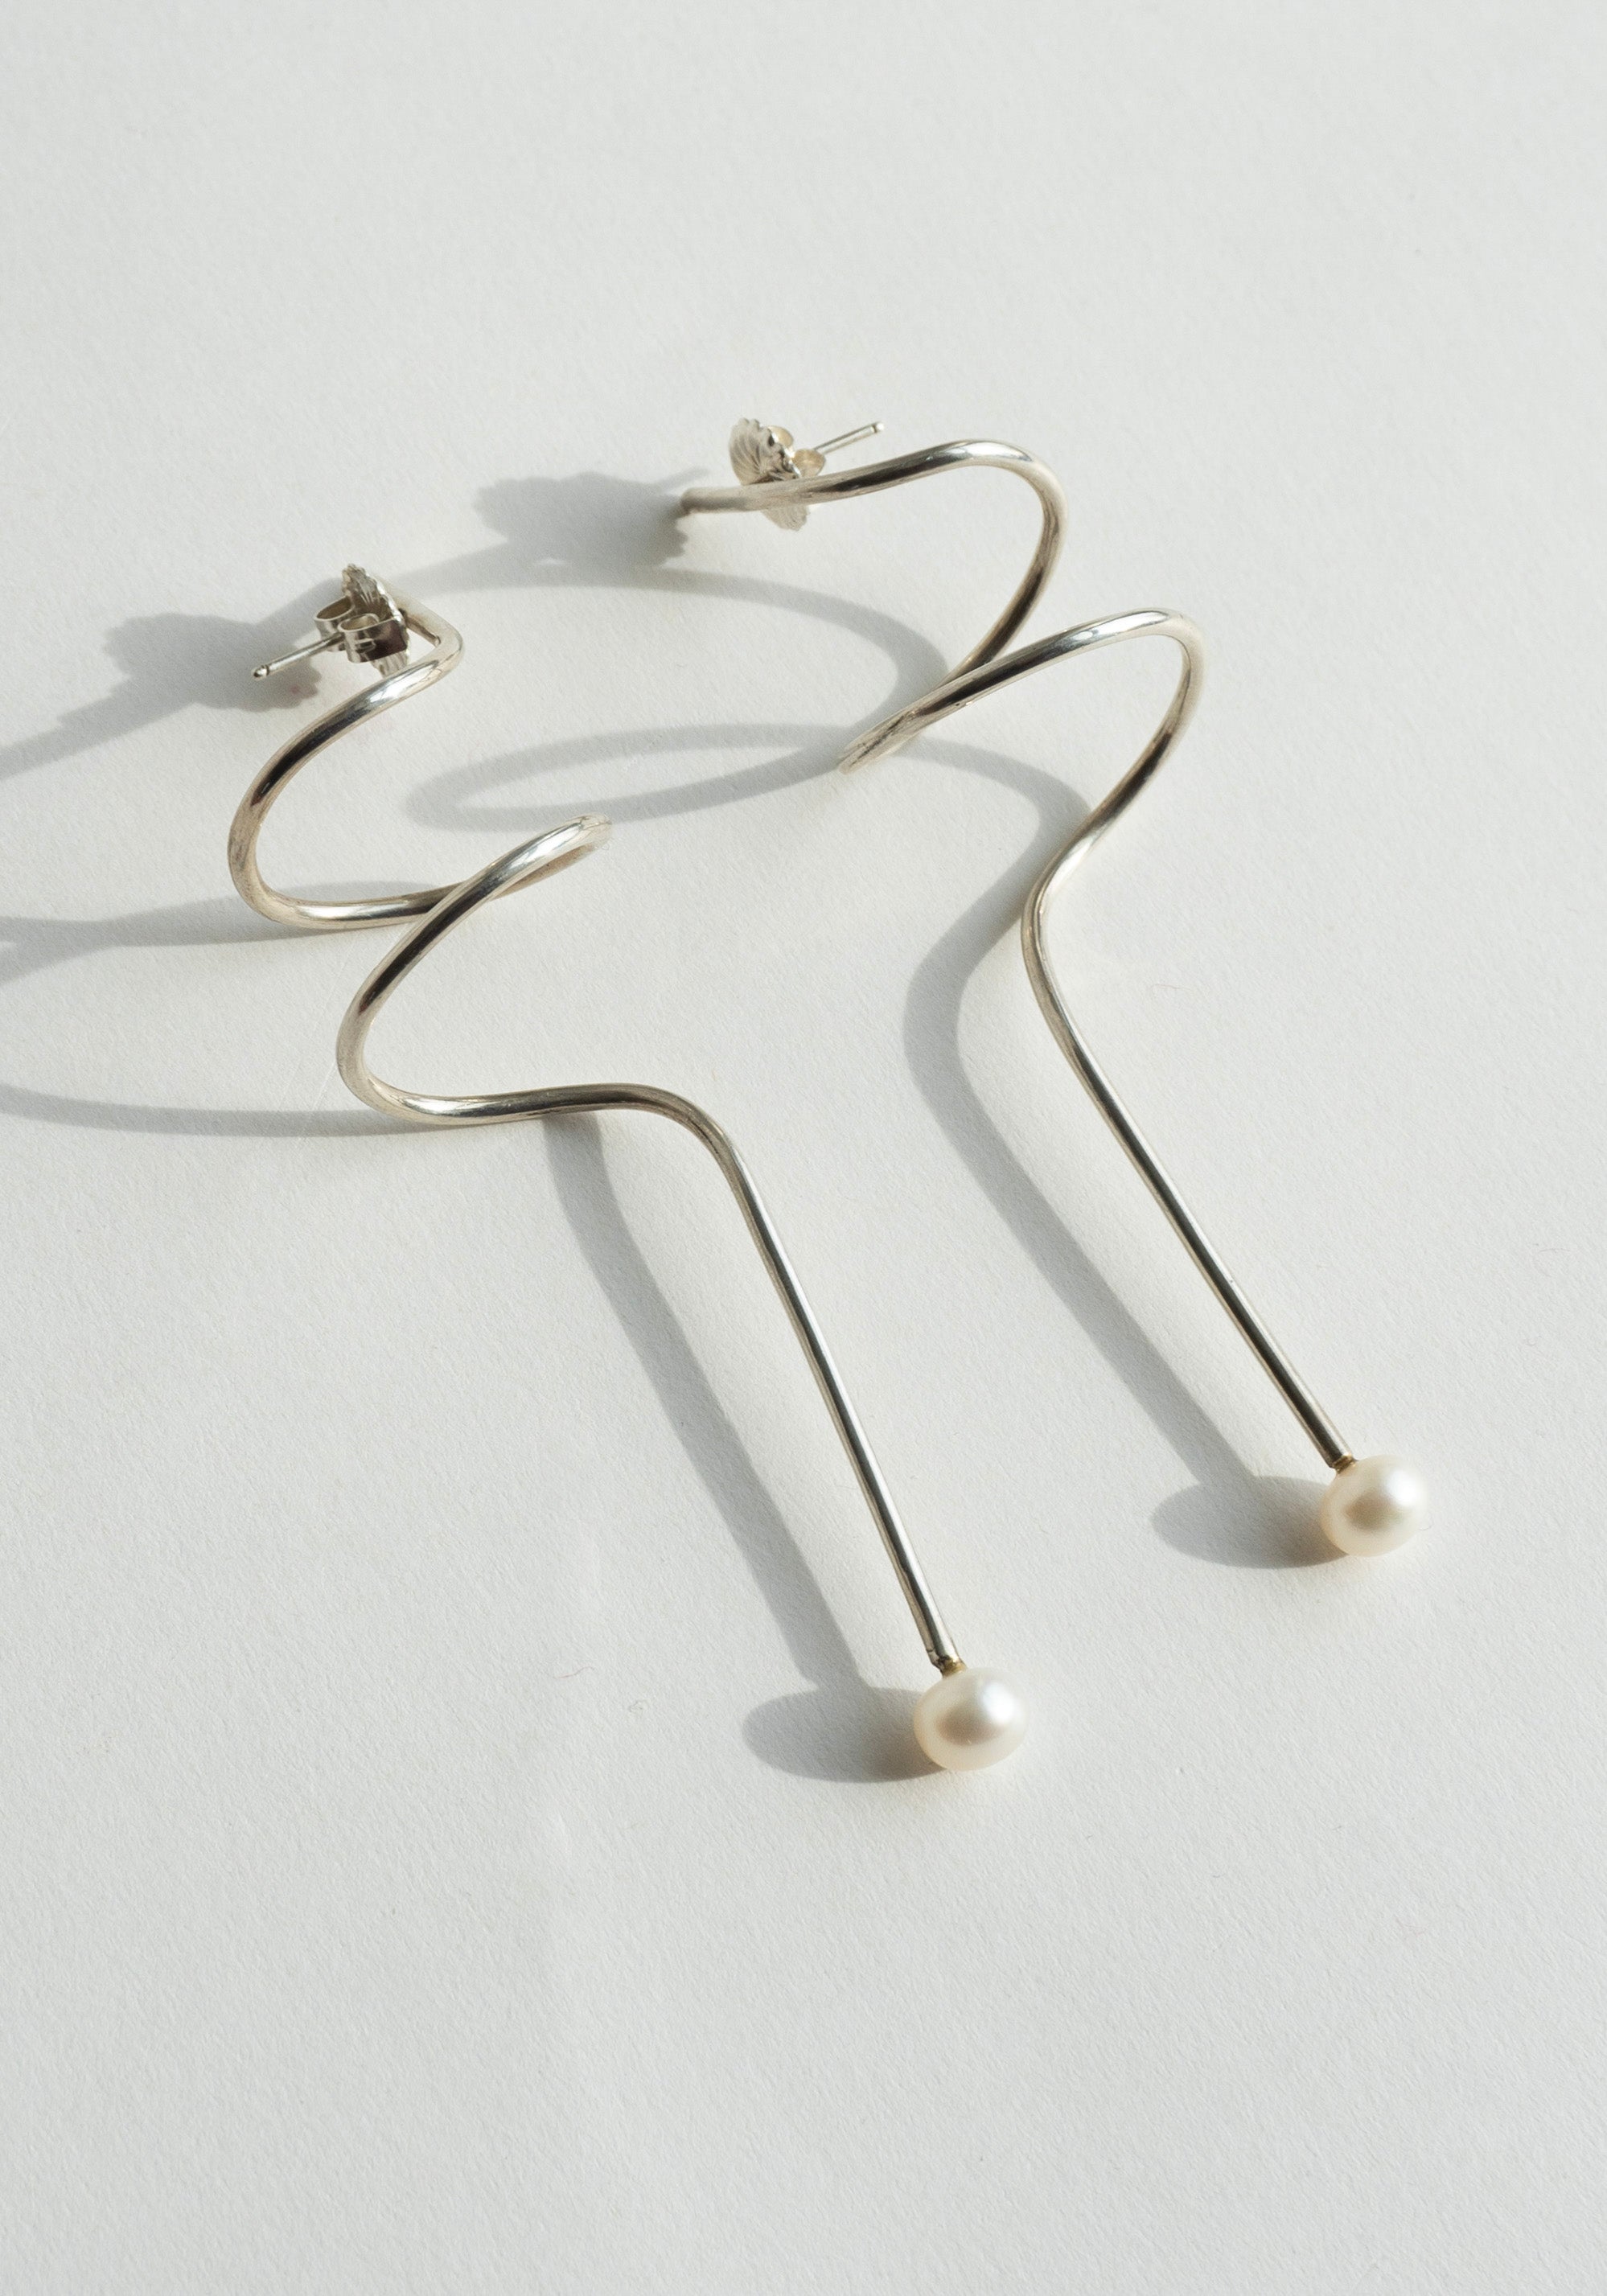 Danica Stamentic Long Spiral Drop Earrings with Pearls